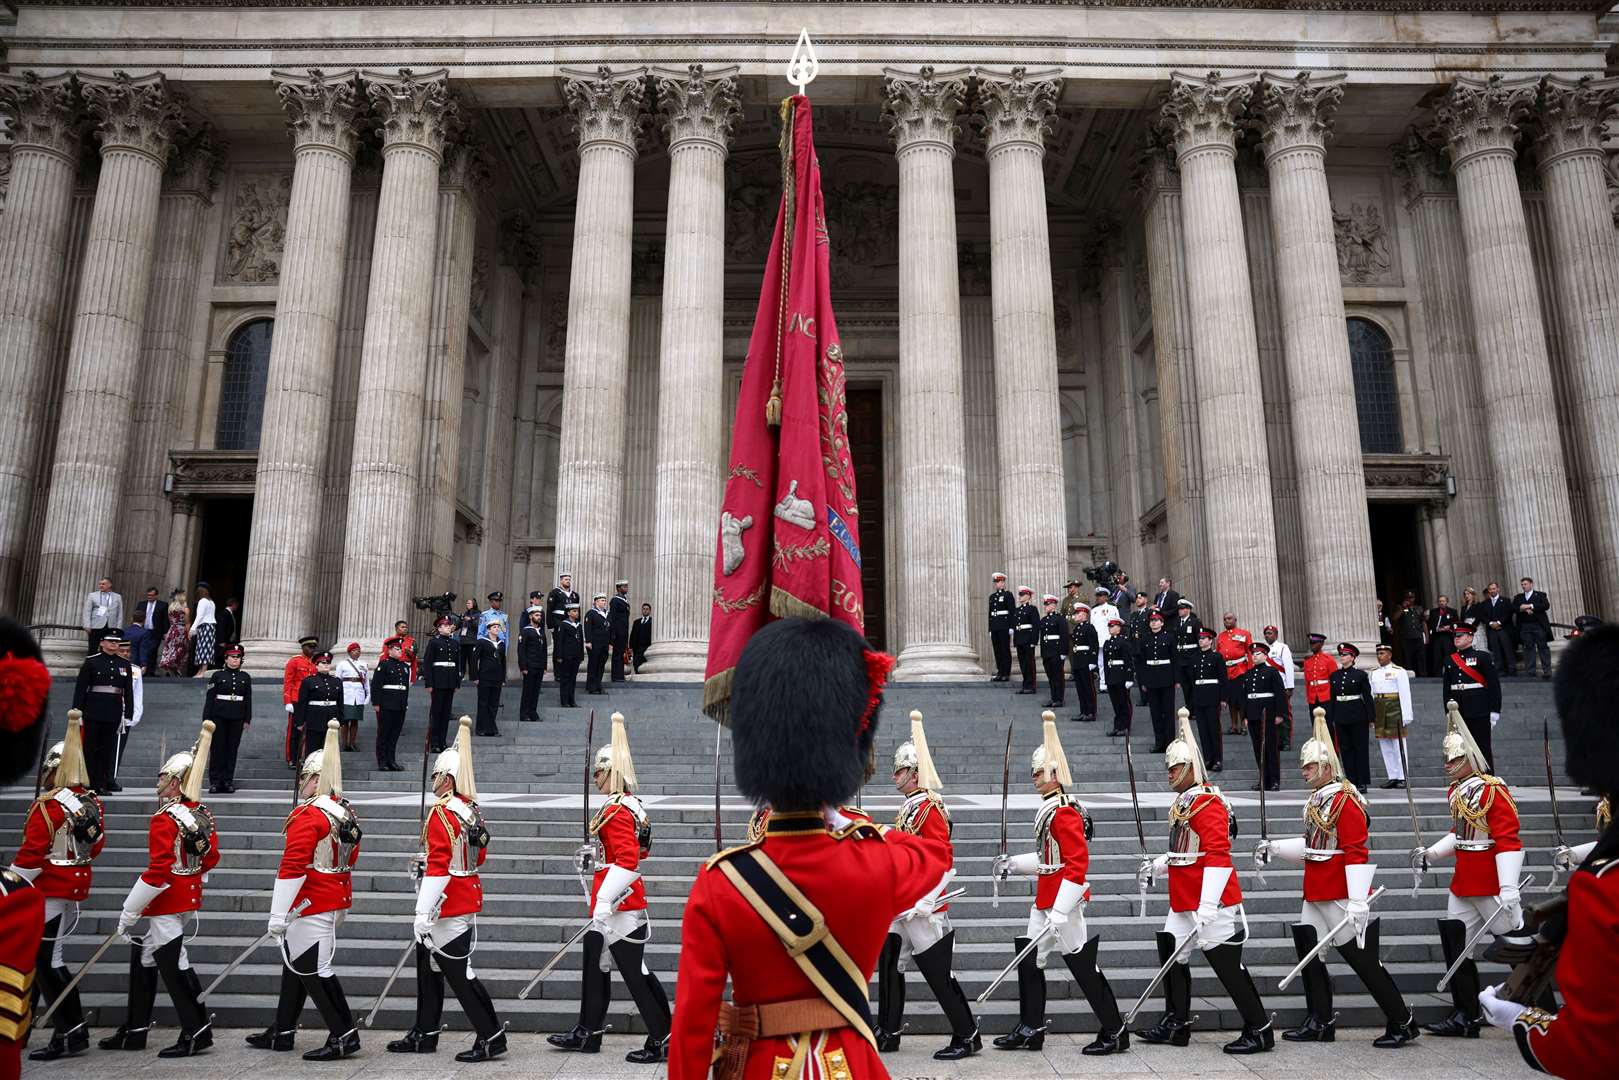 A Guard of Honour ahead lived the cathedral steps (Henry Nicholls/PA)